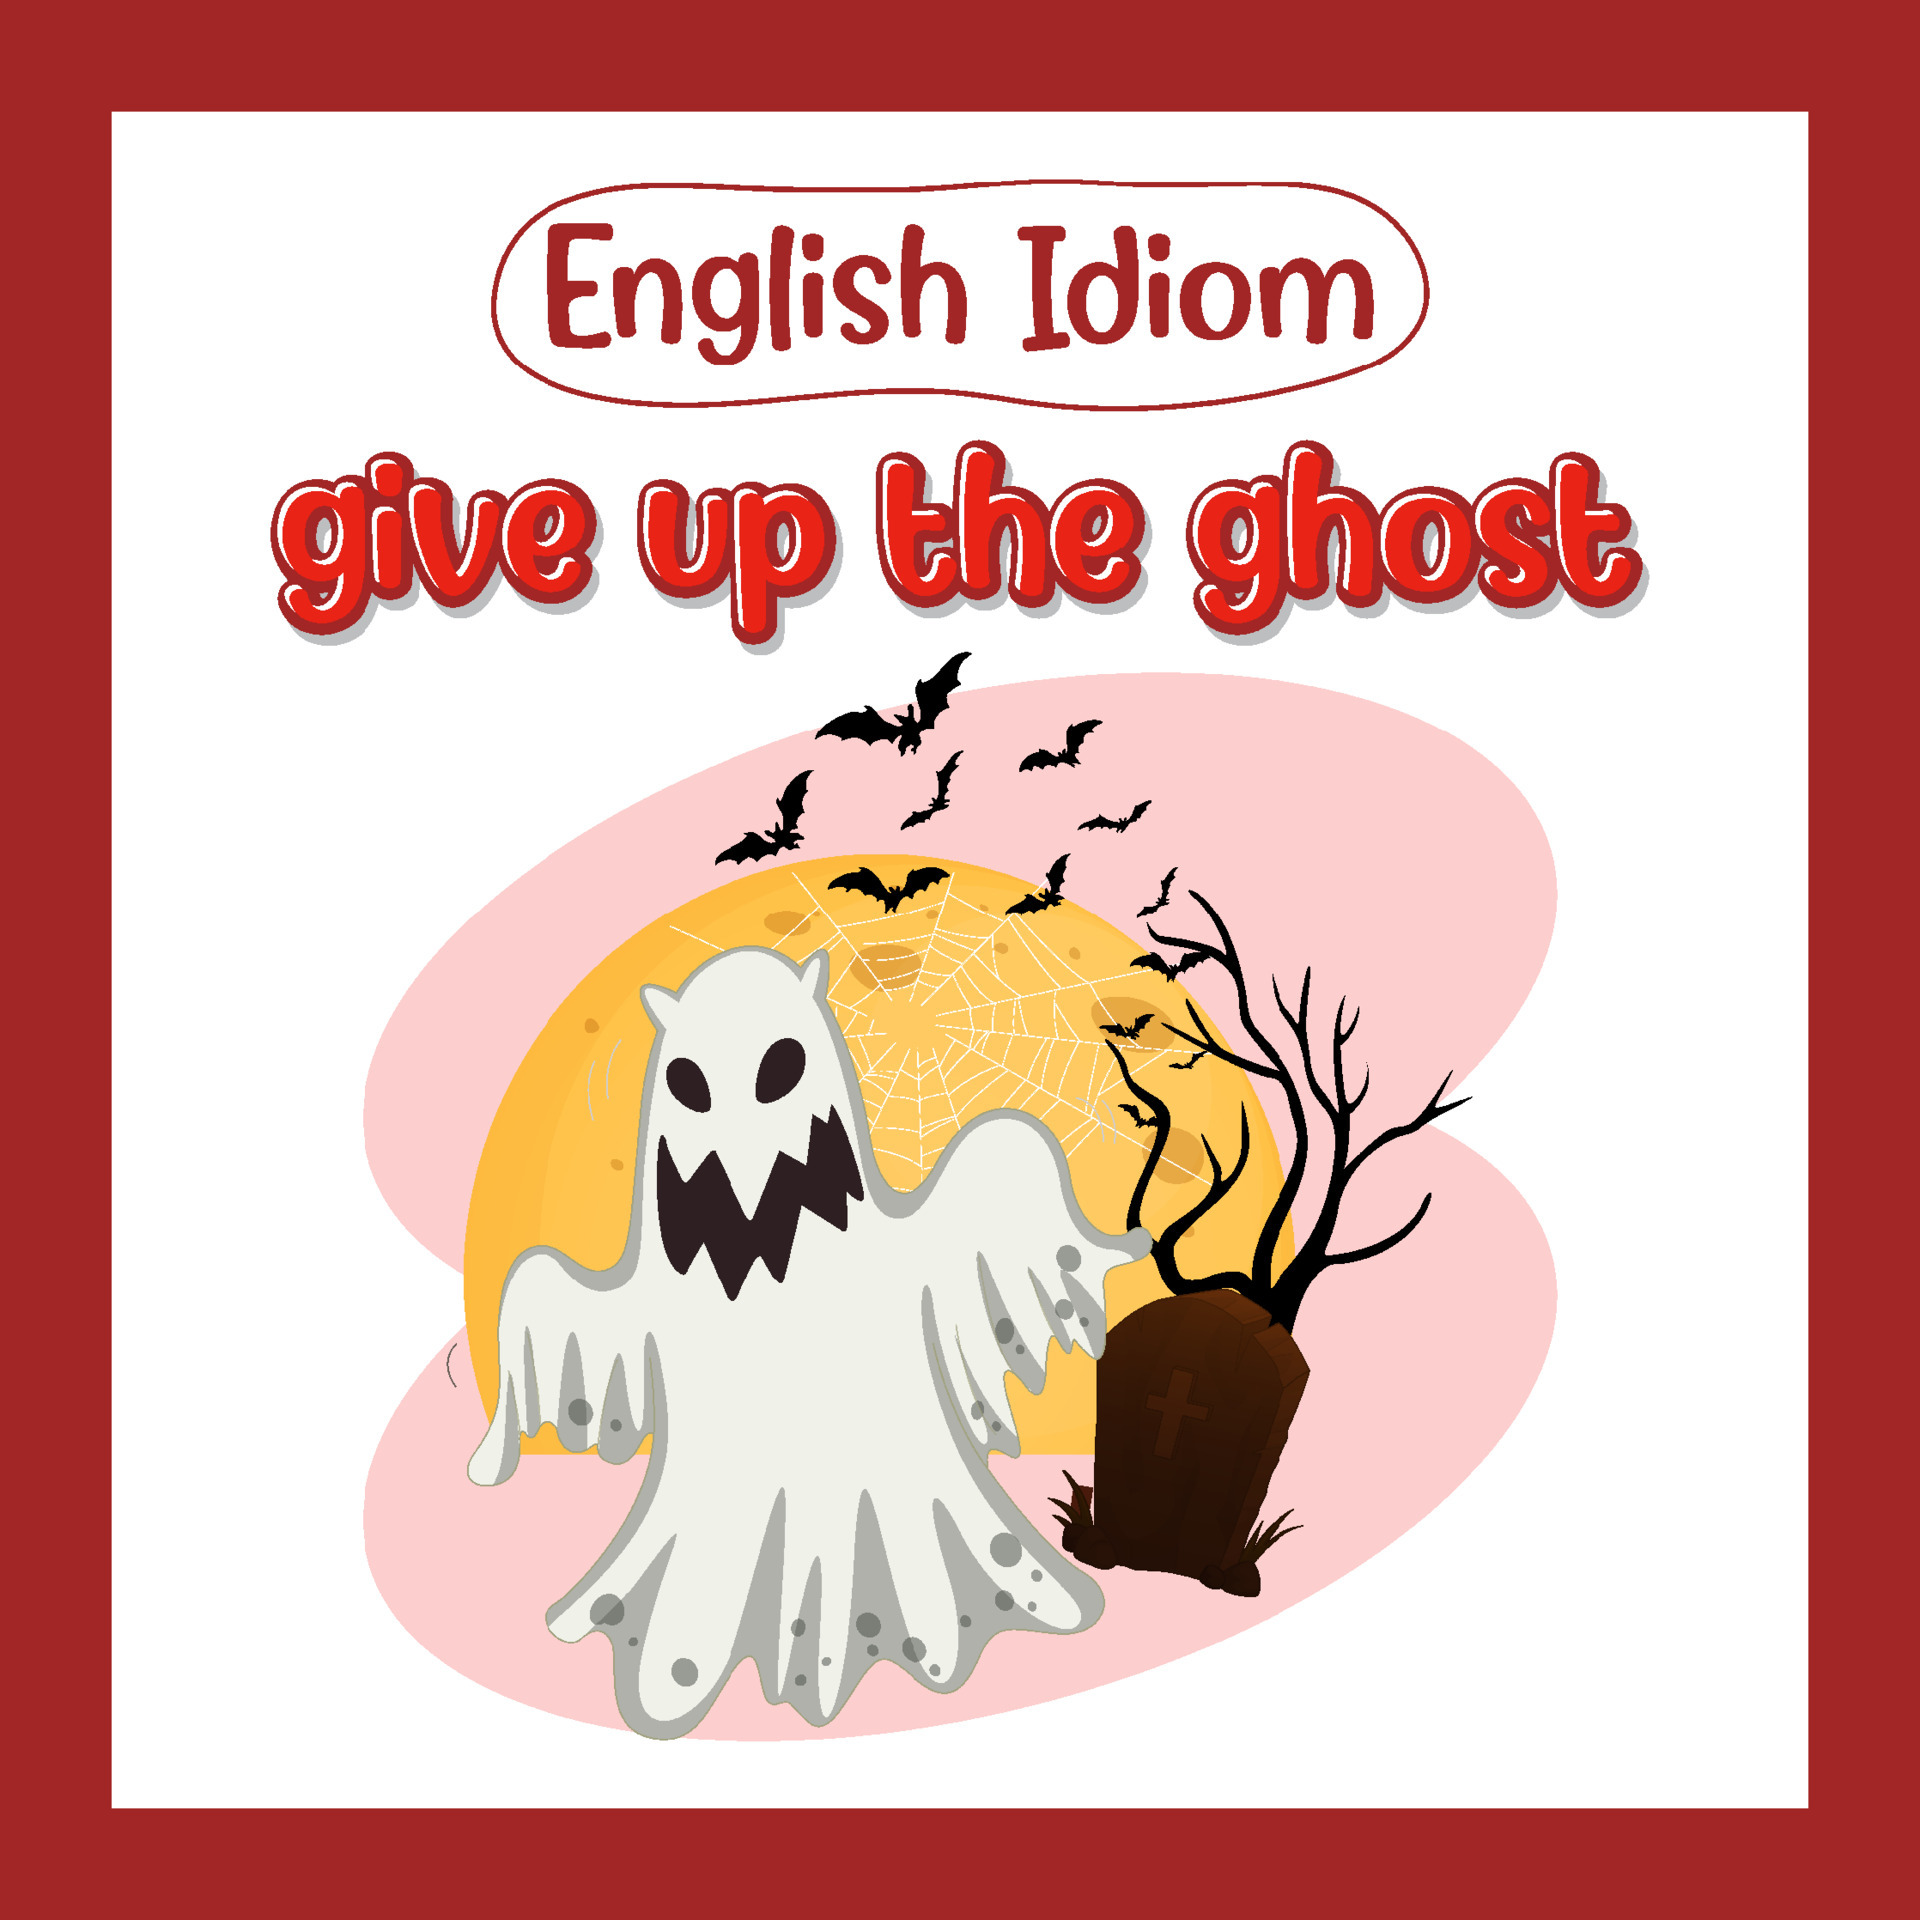 to gave up the ghost meaning